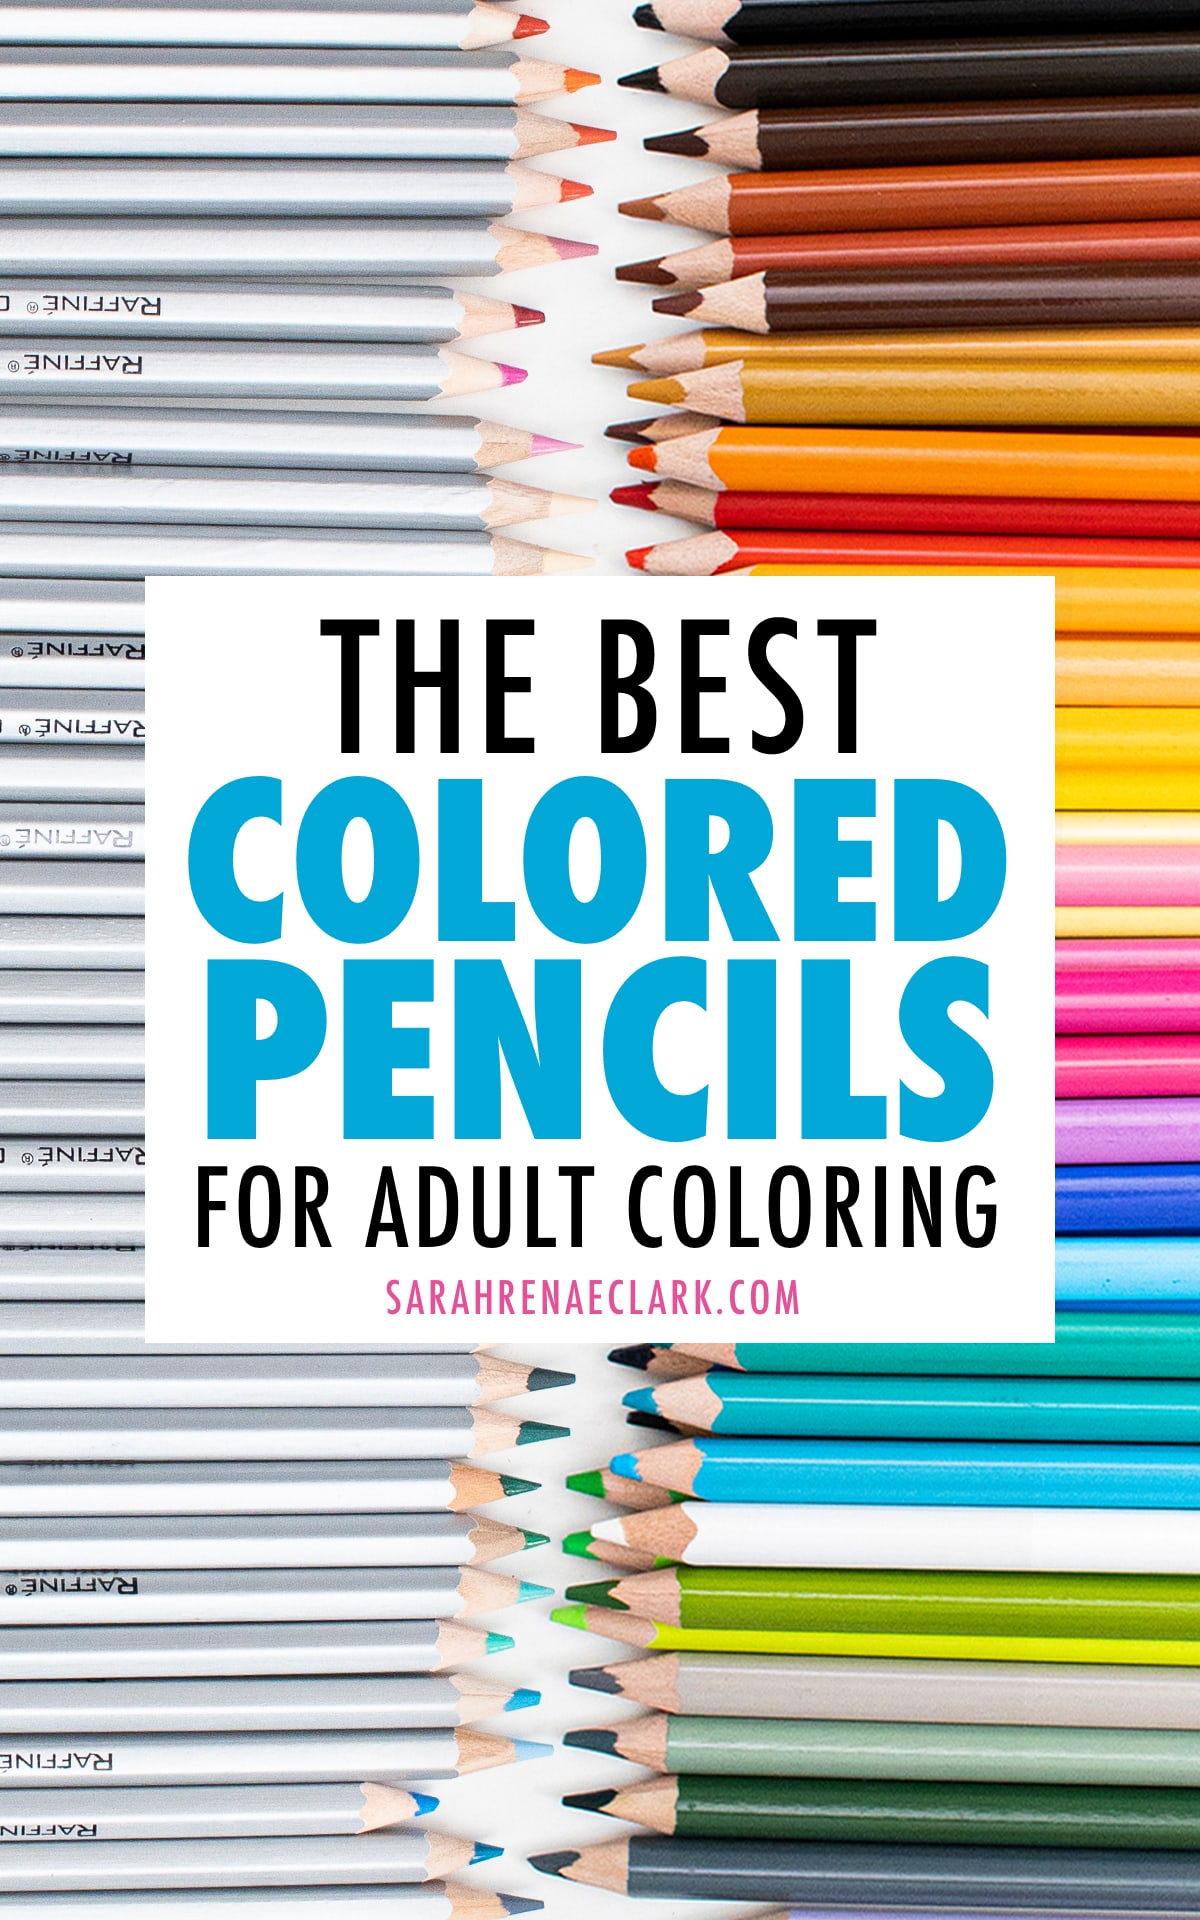 The Best Colored Pencils For Adult Coloring